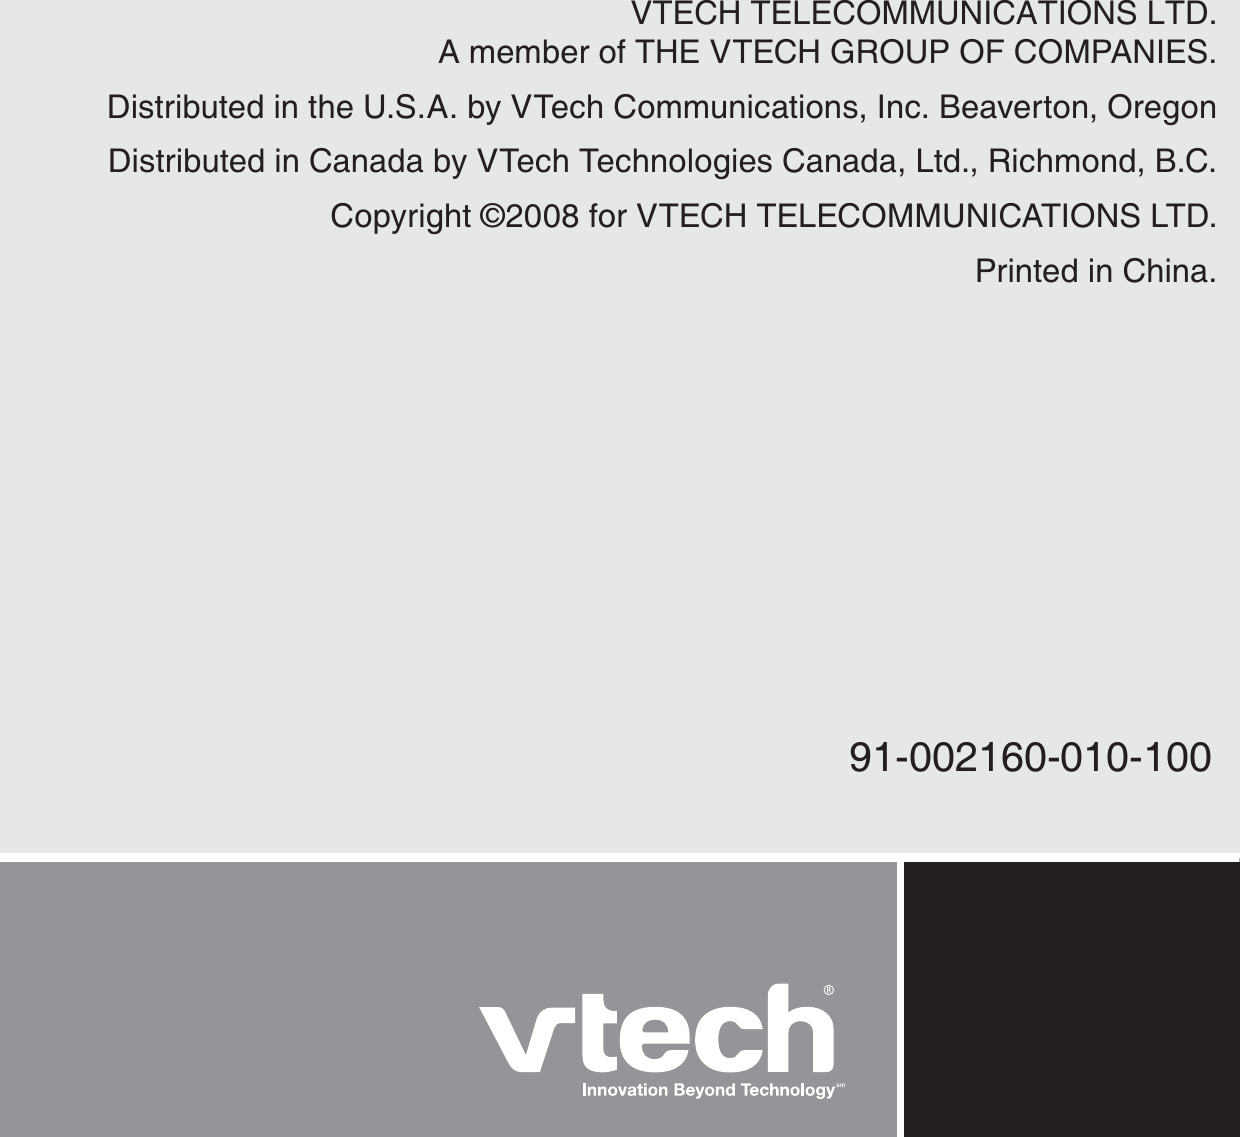 VTECH TELECOMMUNICATIONS LTD.A member of THE VTECH GROUP OF COMPANIES.Distributed in the U.S.A. by VTech Communications, Inc. Beaverton, OregonDistributed in Canada by VTech Technologies Canada, Ltd., Richmond, B.C.Copyright ©2008 for VTECH TELECOMMUNICATIONS LTD.Printed in China.91-002160-010-100